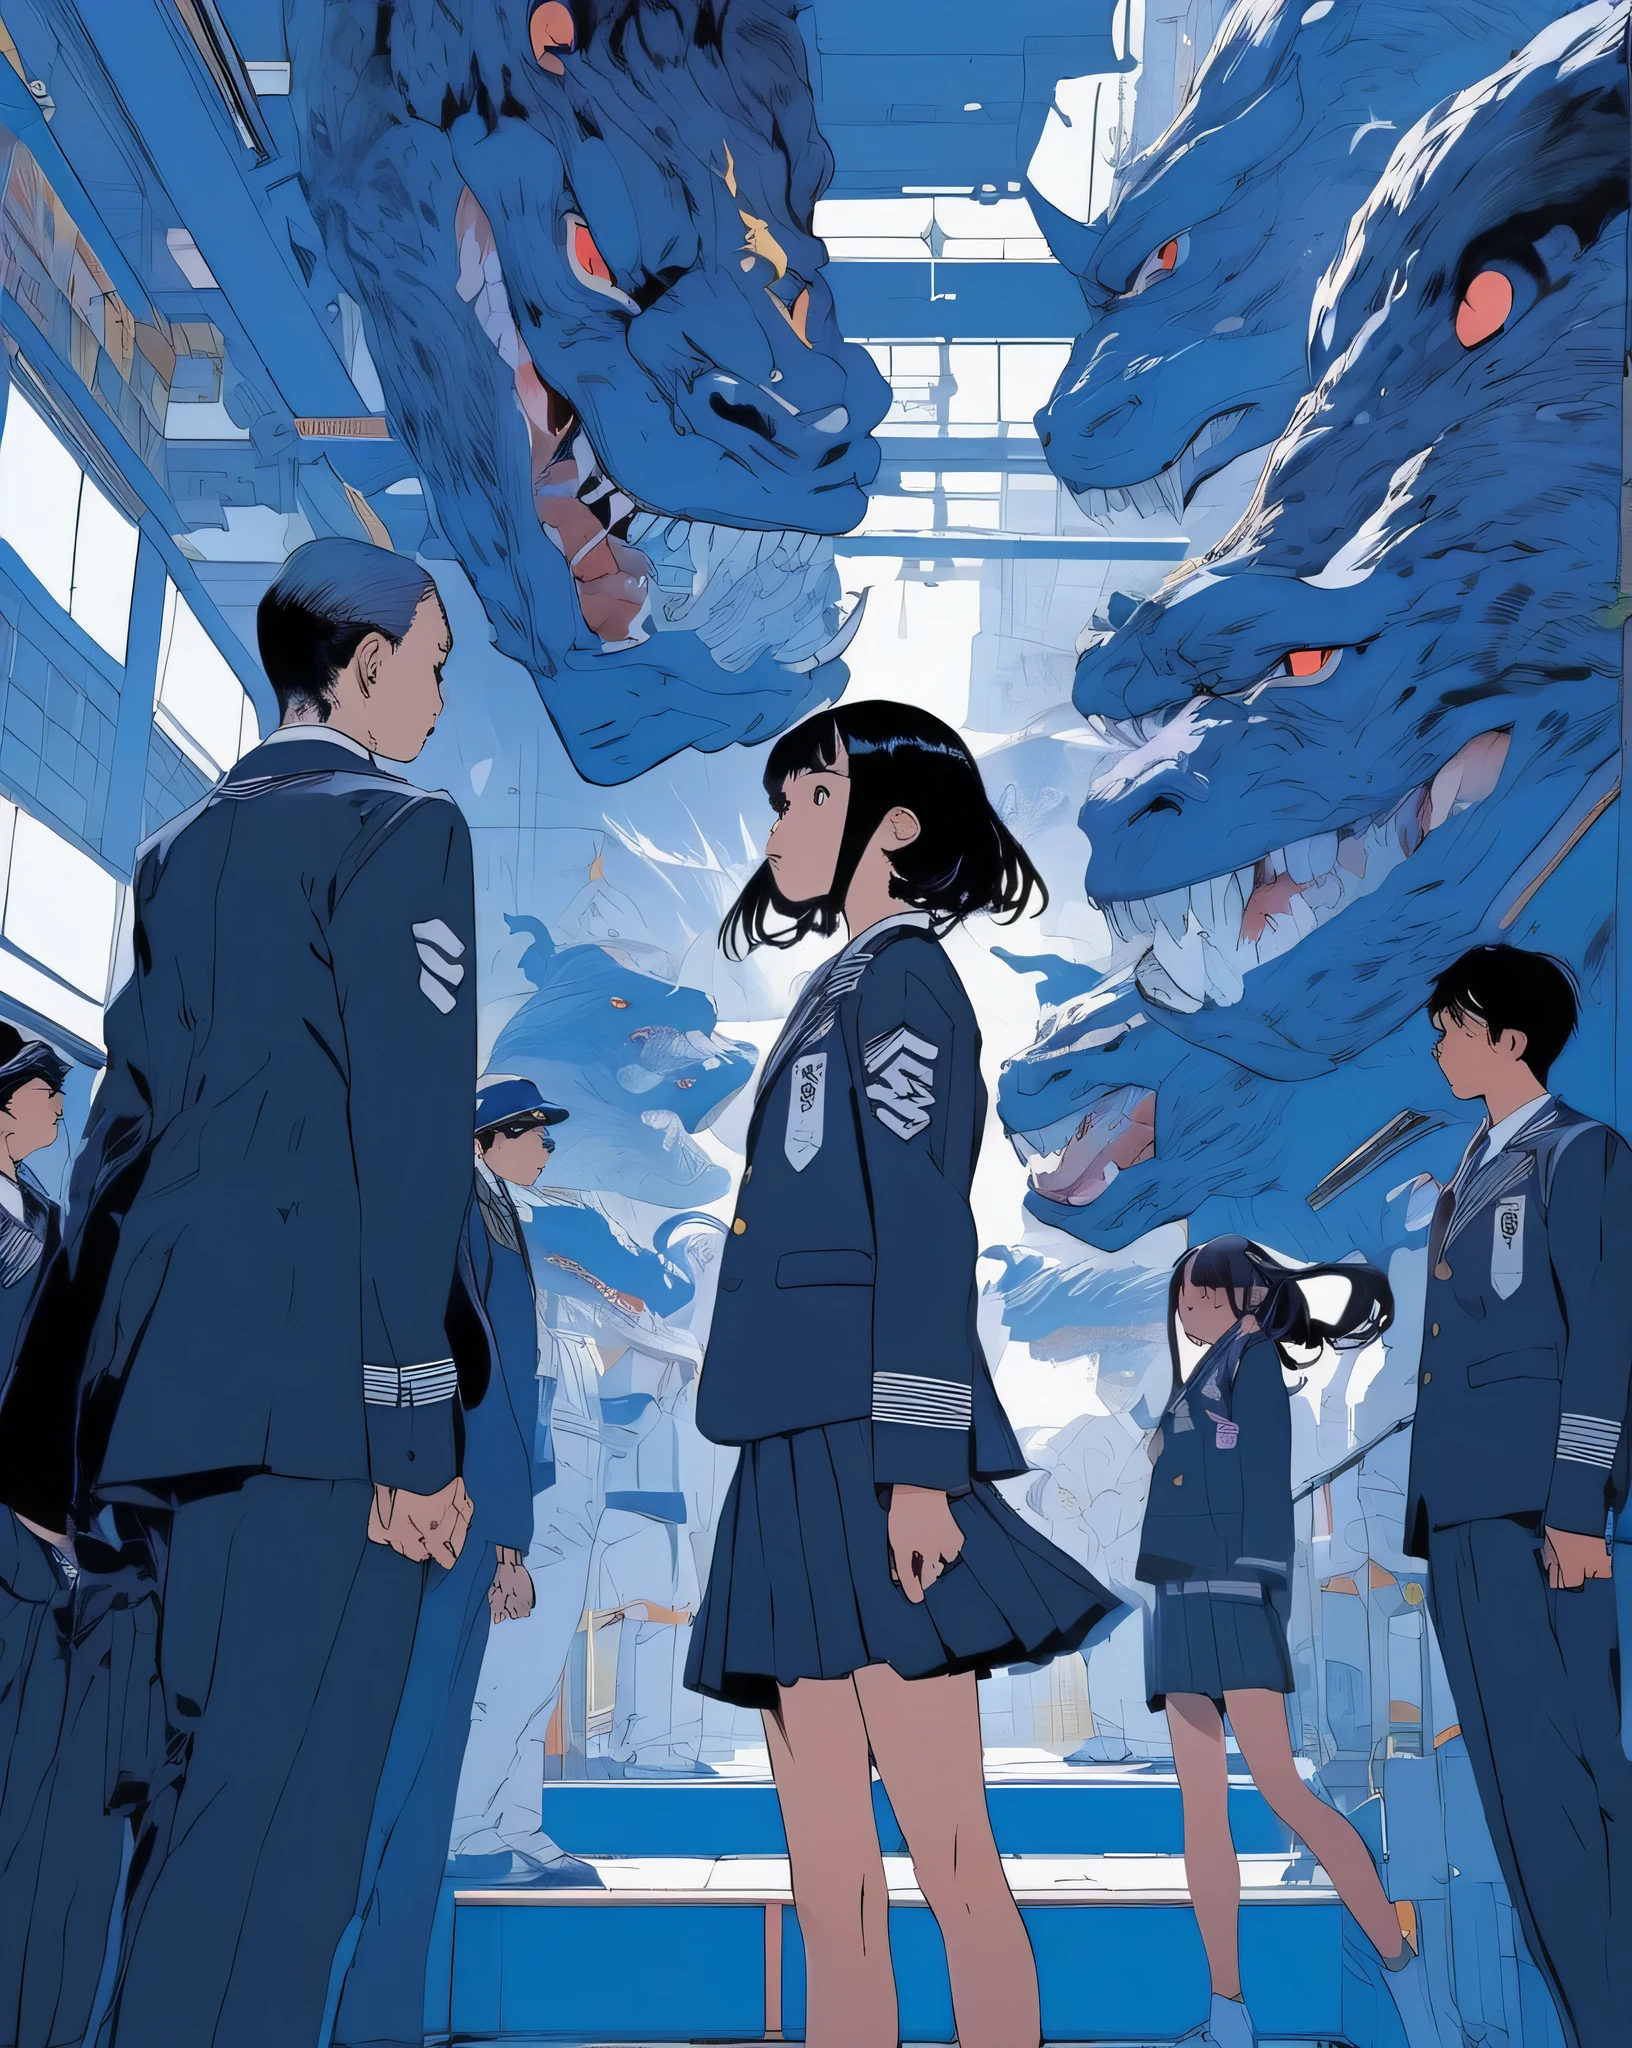 Japanese high school girl monsters by Laurie Greasley and Takeshi Obata, The desire to achieve enlightenment, Wearing a blazer uniform、nirvana, navy blue and white, Oil Paint, be familiar with, realistic, 8k uh, high quality、highest amount of information、masterpiece、Detailed writing、